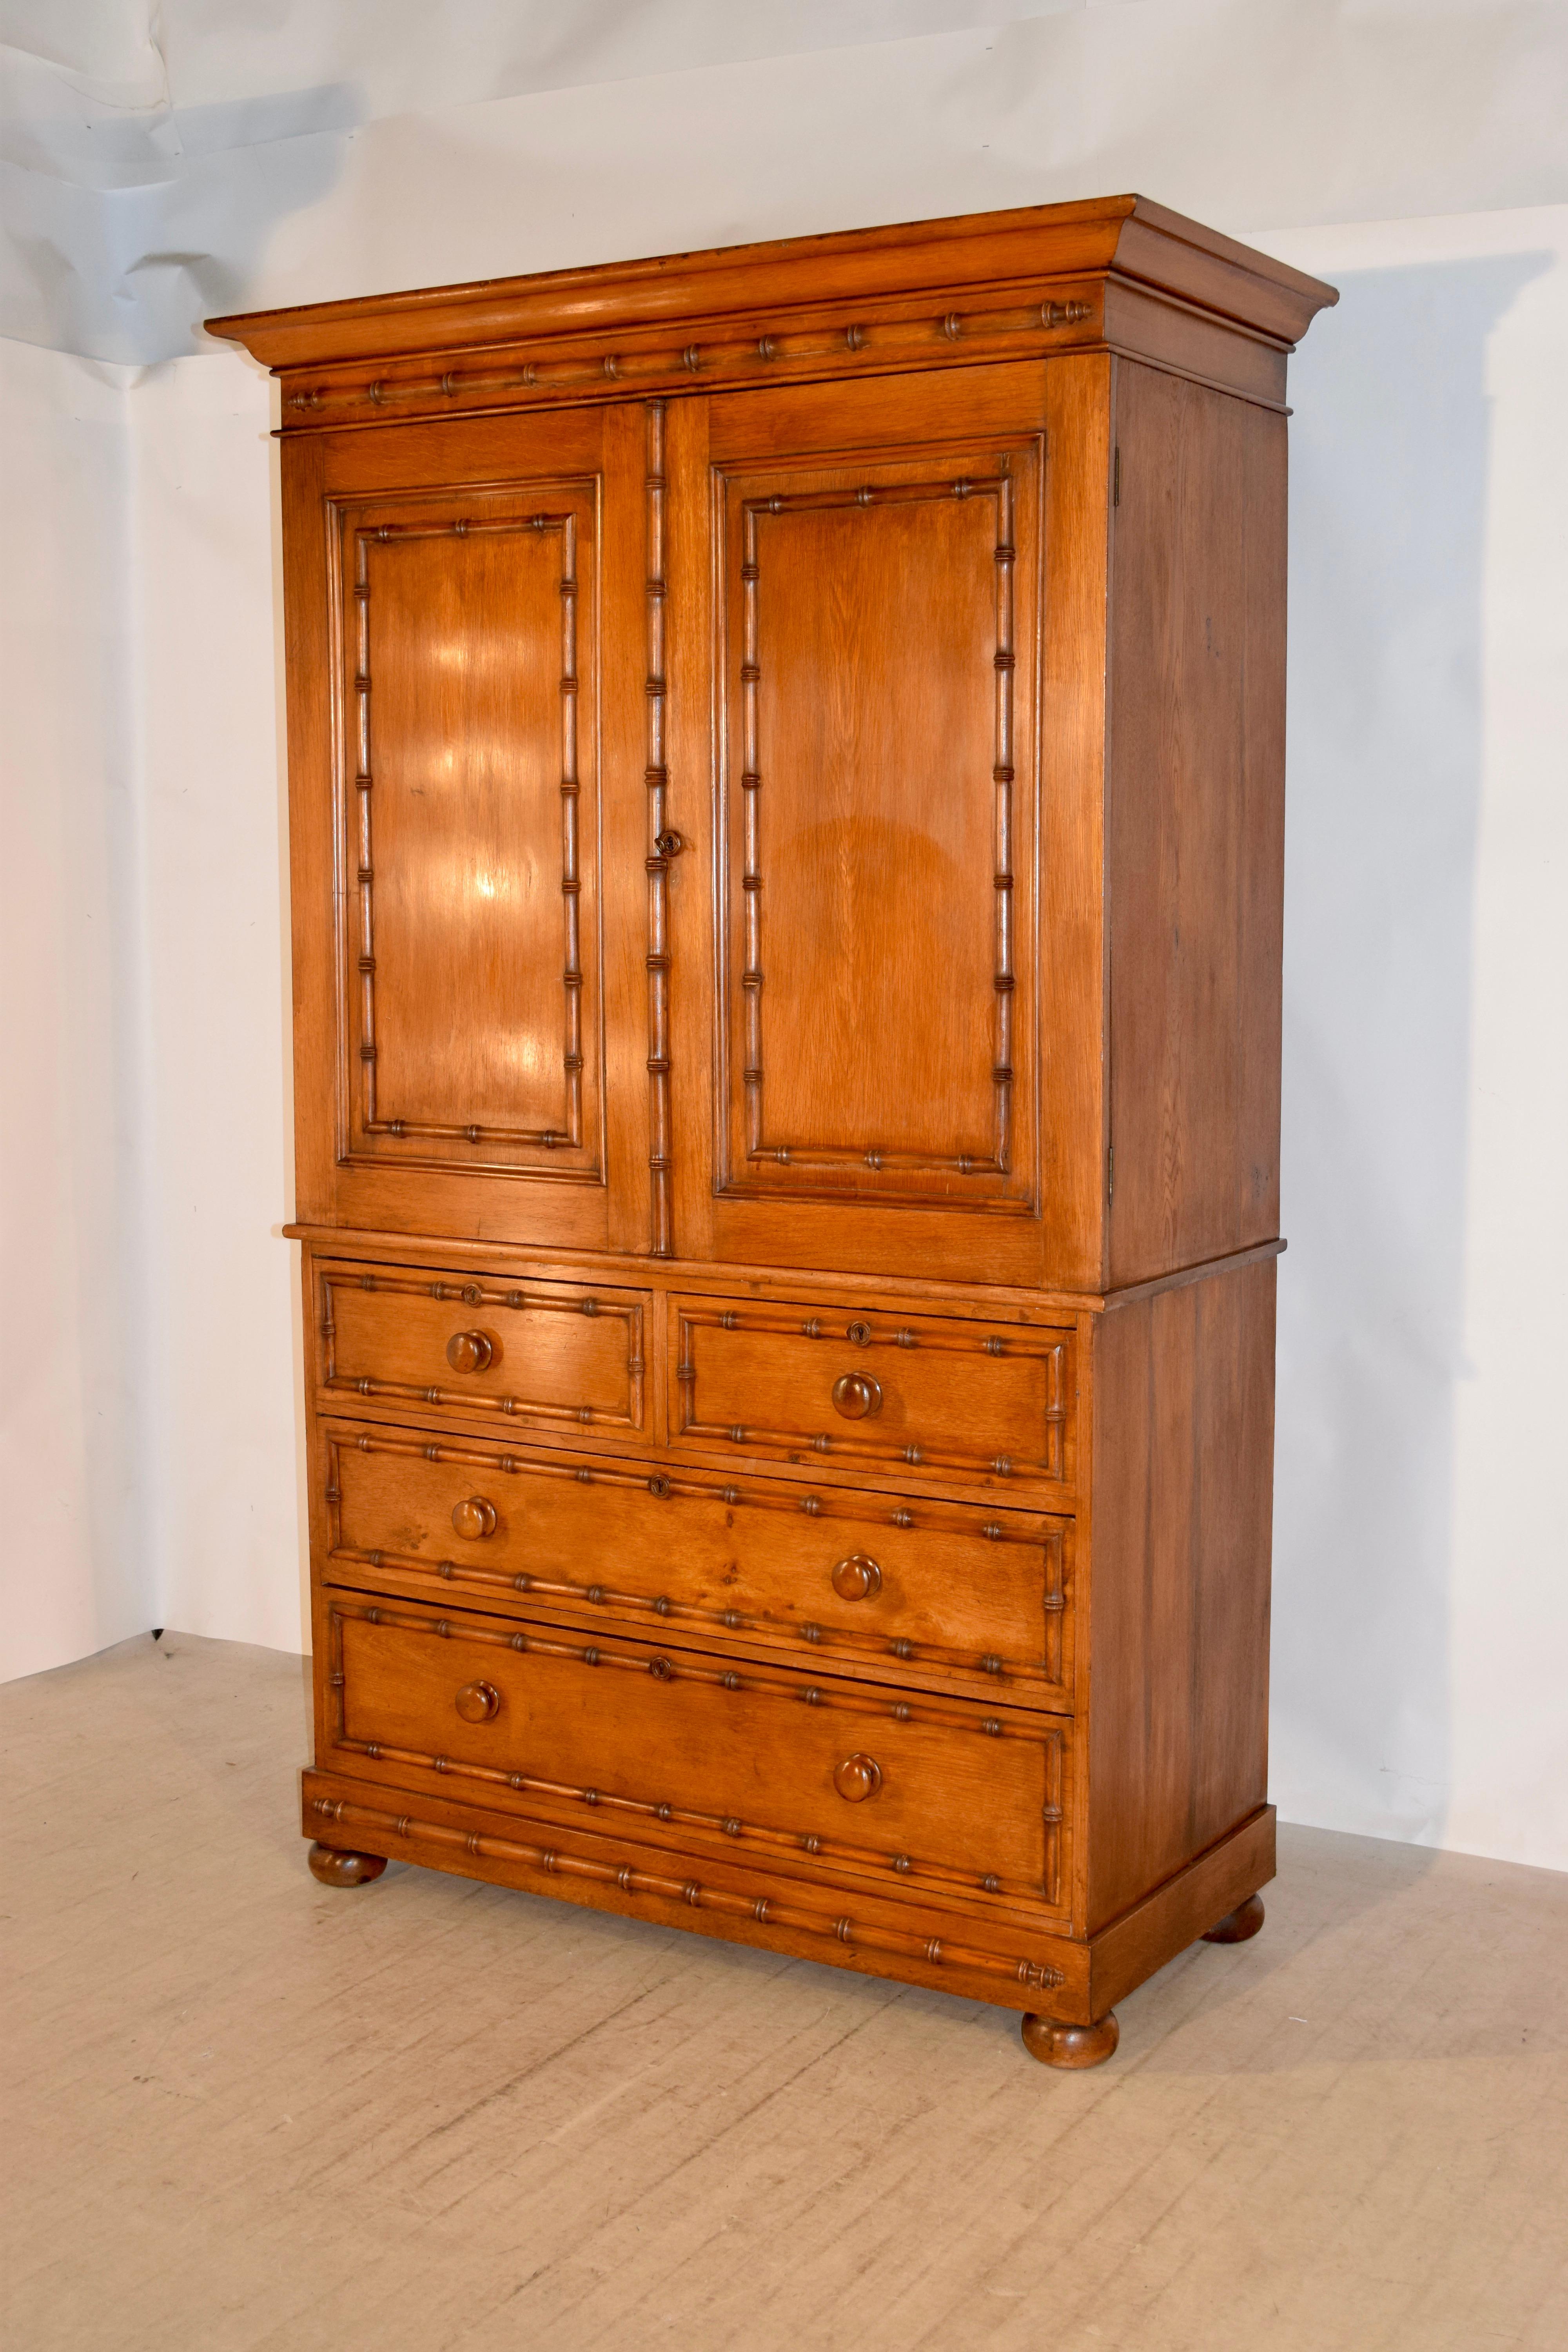 19th century linen press from England made from oak. The top is decorated with a crown molding over two paneled doors, both with applied faux bamboo moldings and simple sides. The doors open to reveal three pull out linen shelves, all with original